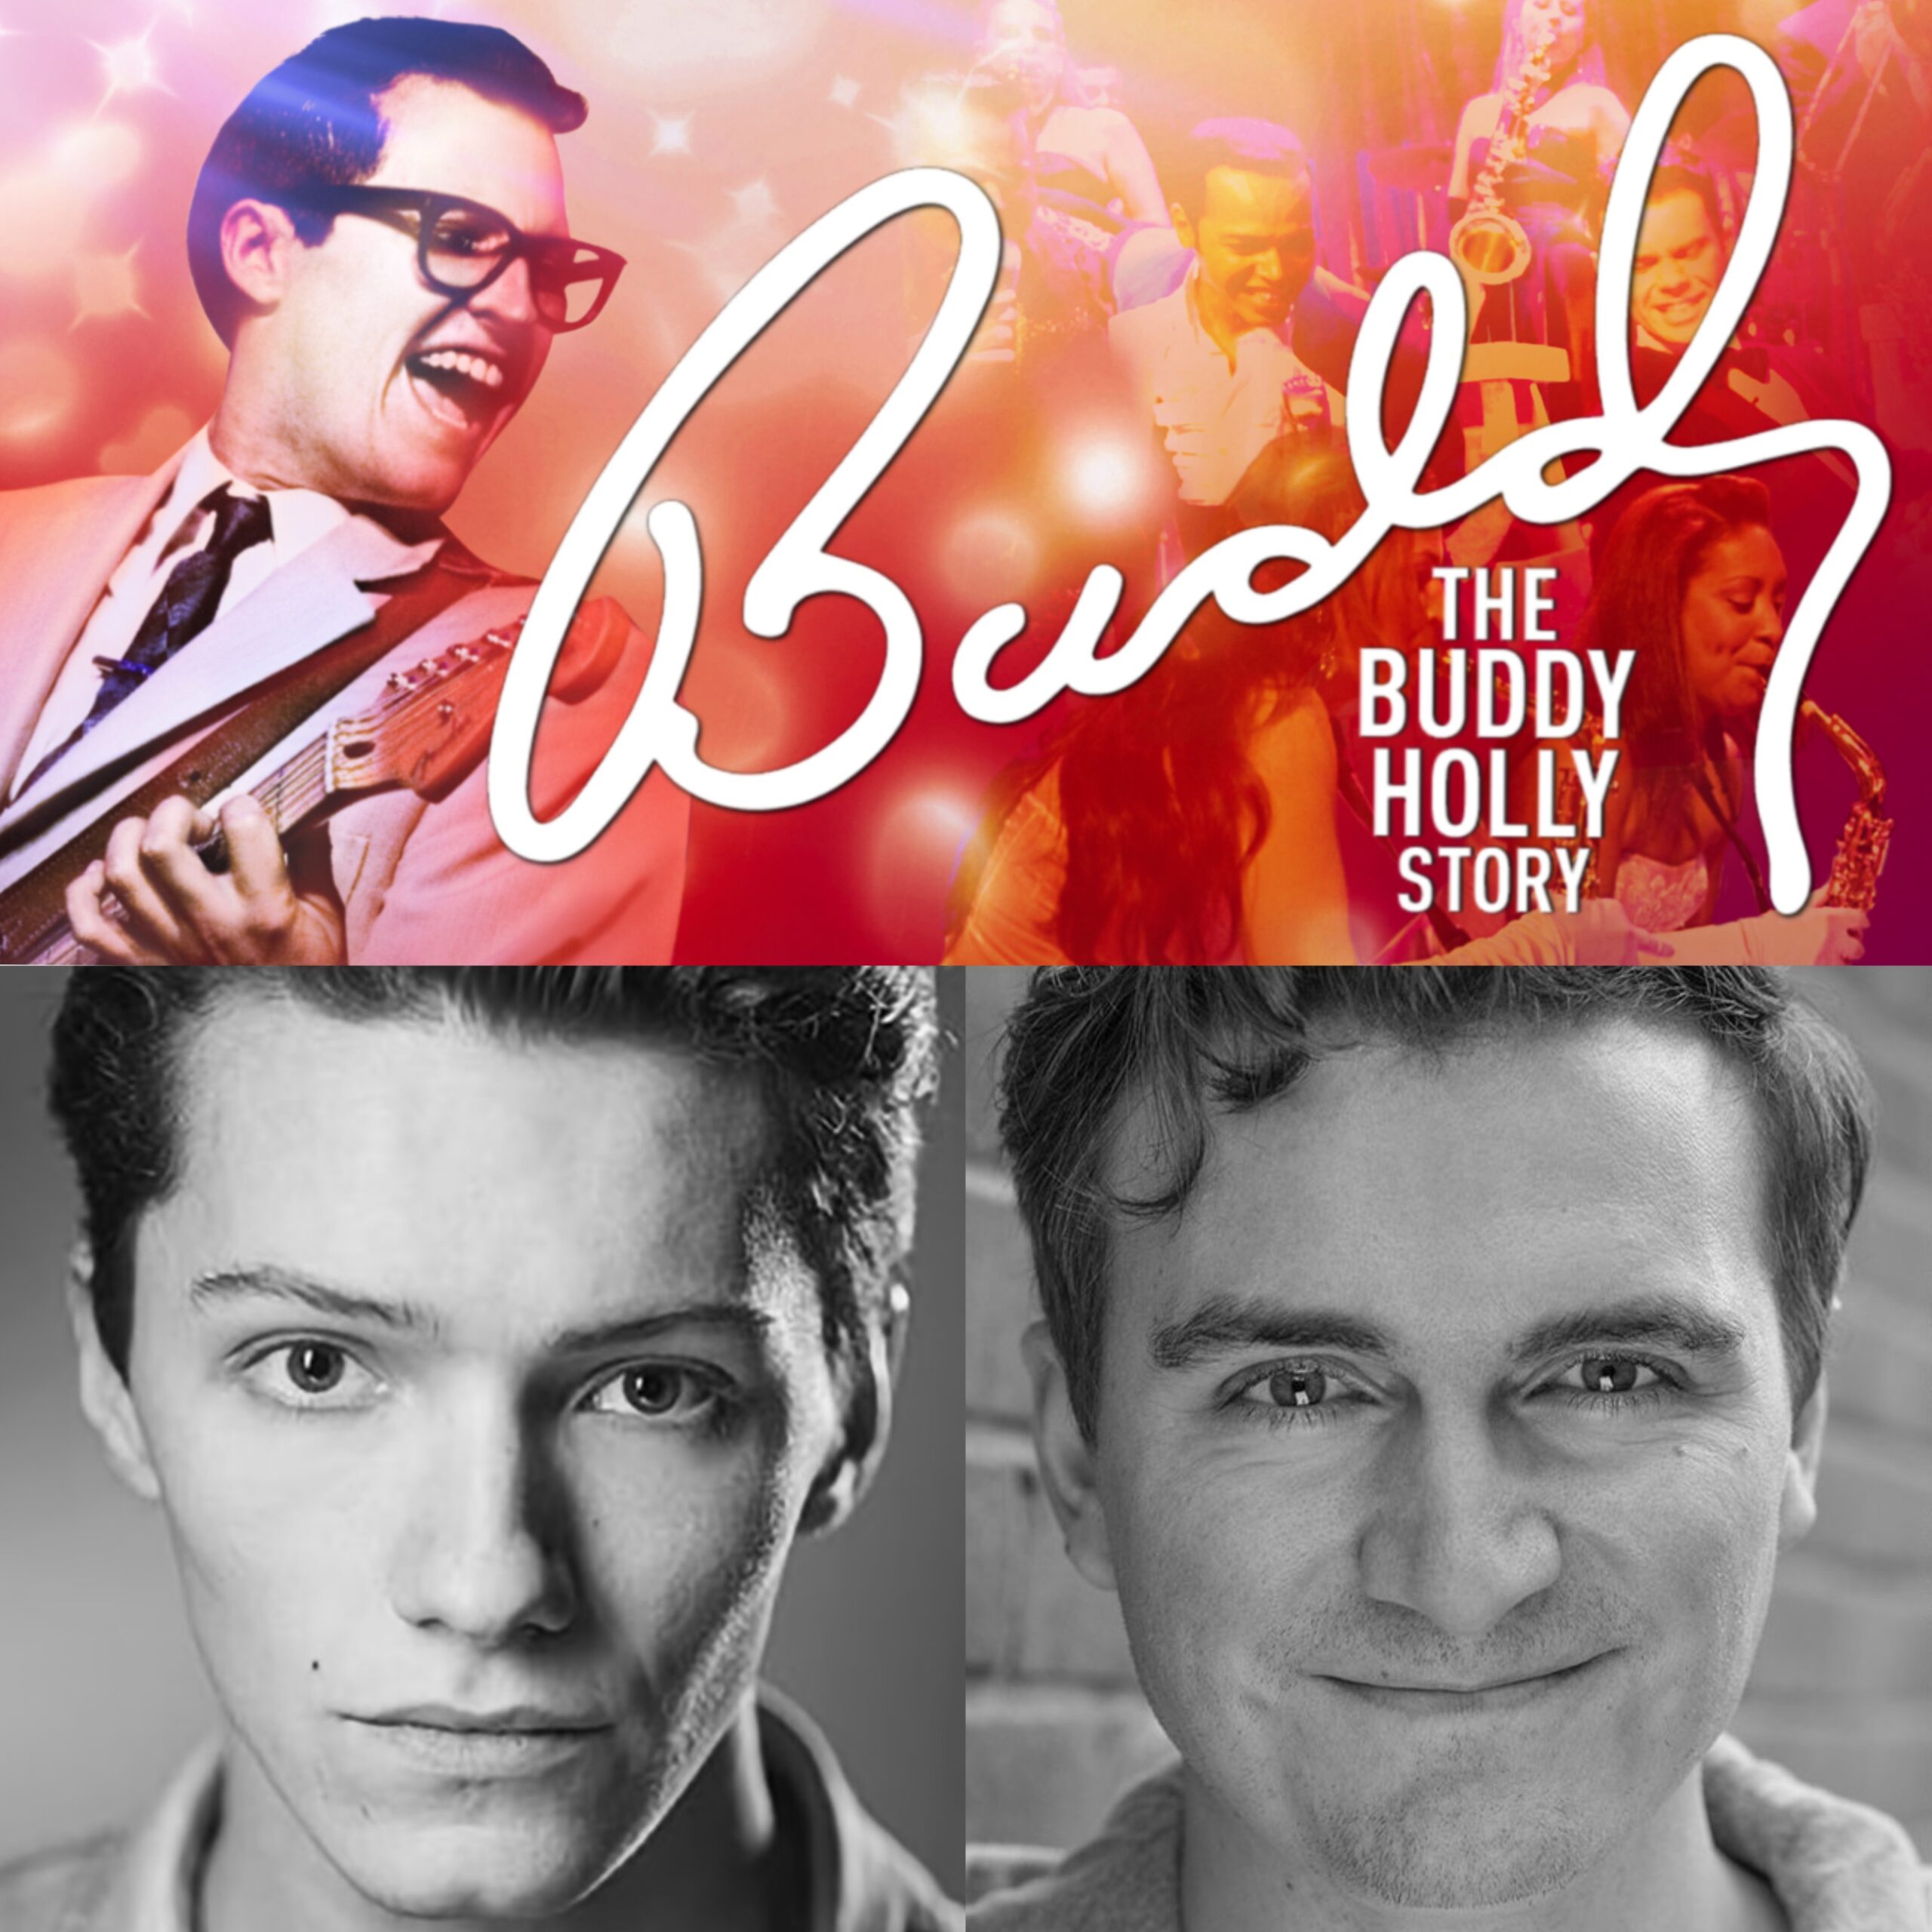 BUDDY THE BUDDY HOLLY STORY UK TOUR CAST ANNOUNCED Theatre Fan